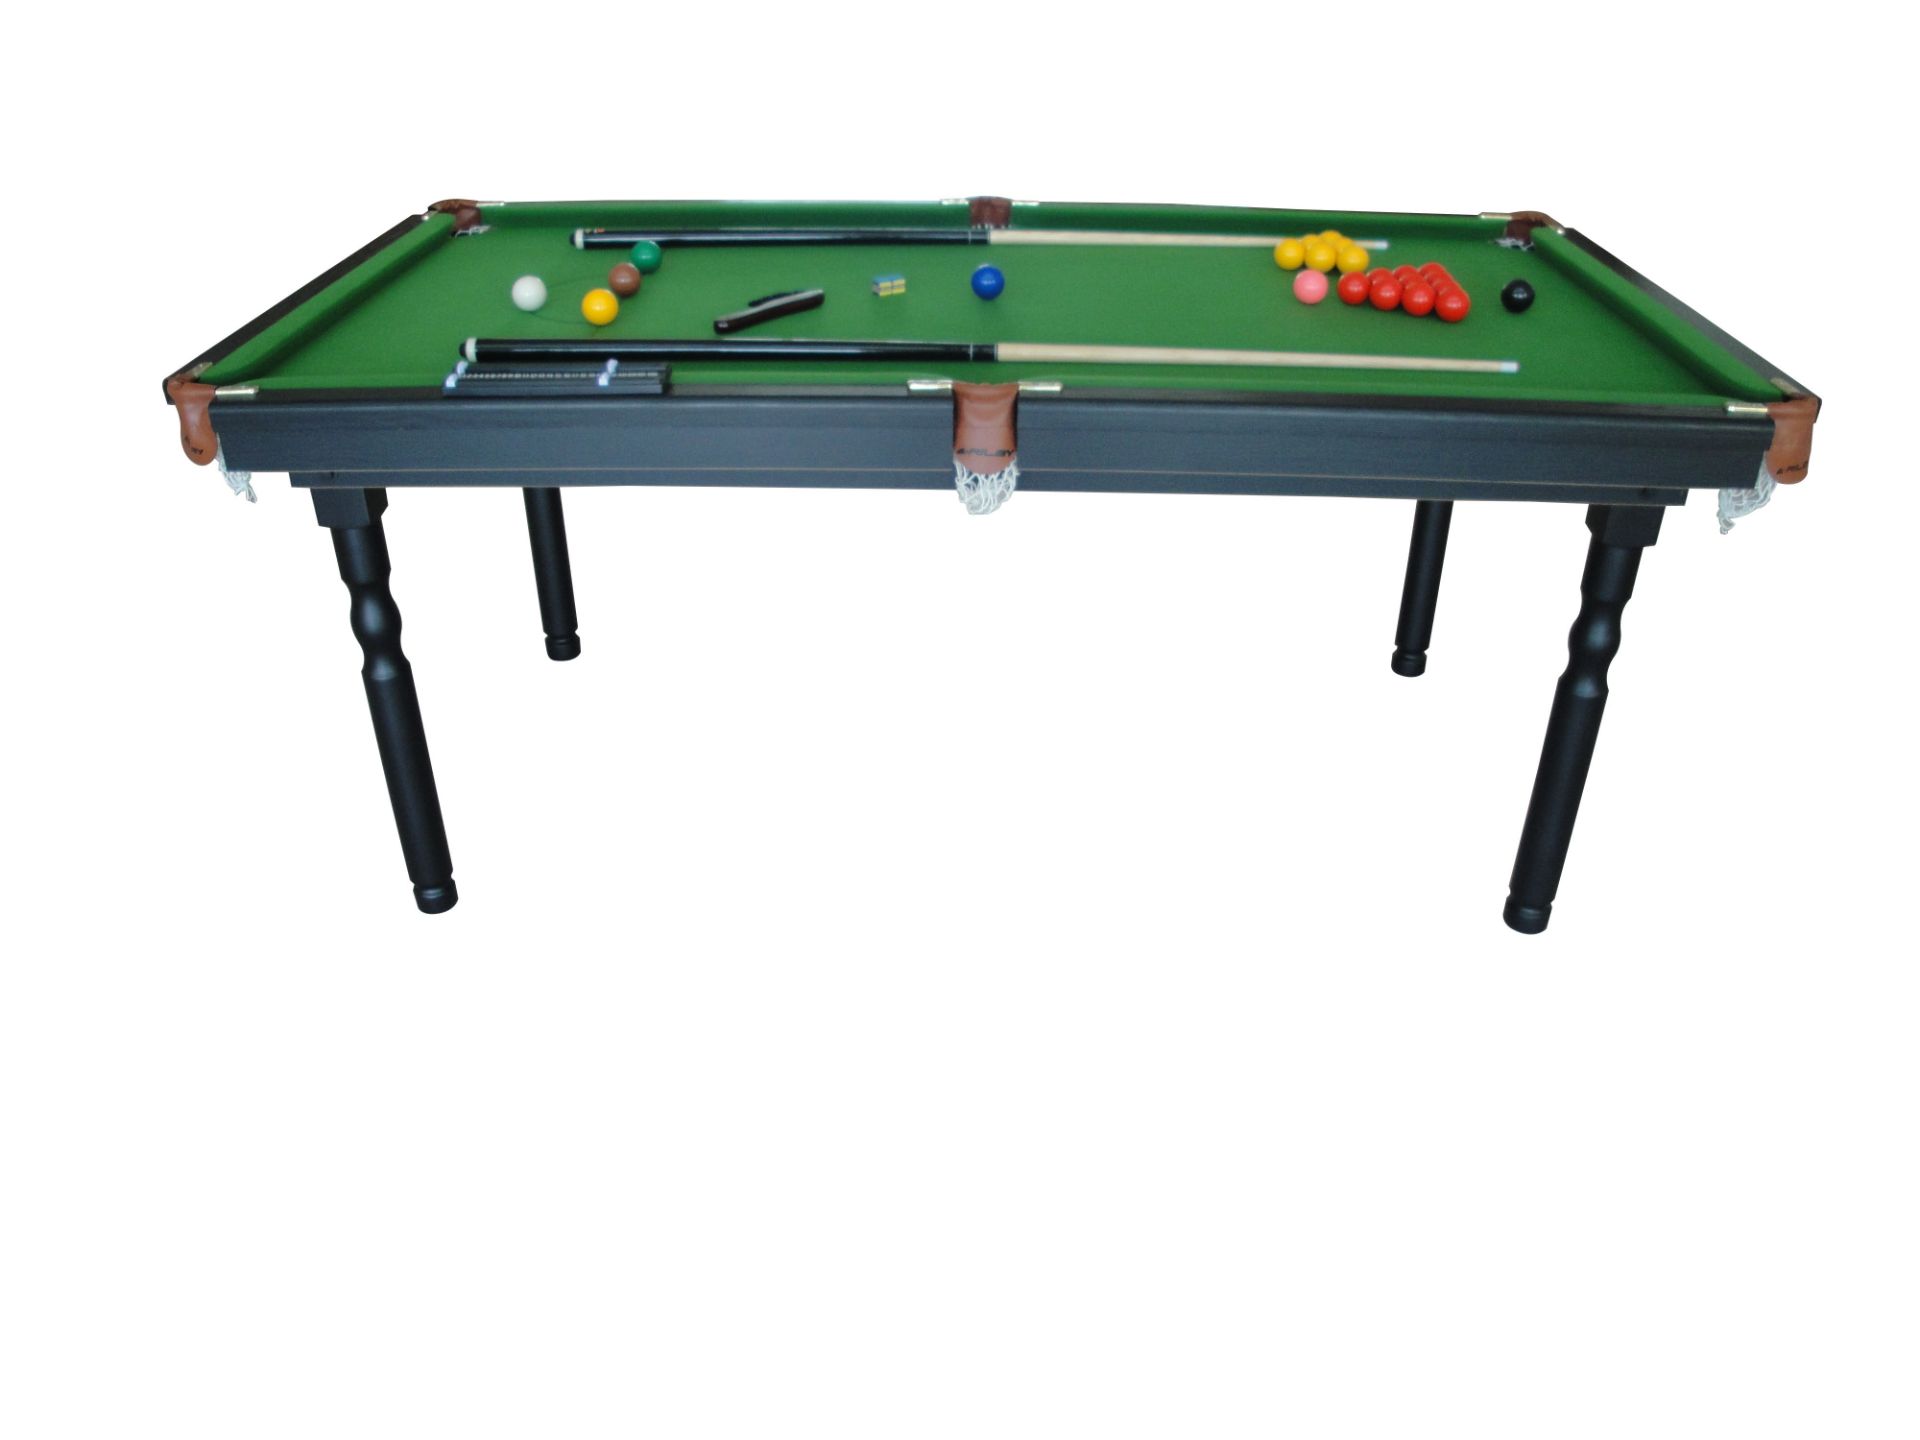 6 x 4 Snooker Table ( New & Boxed ) Complete With Balls, Cues, Triangle etc